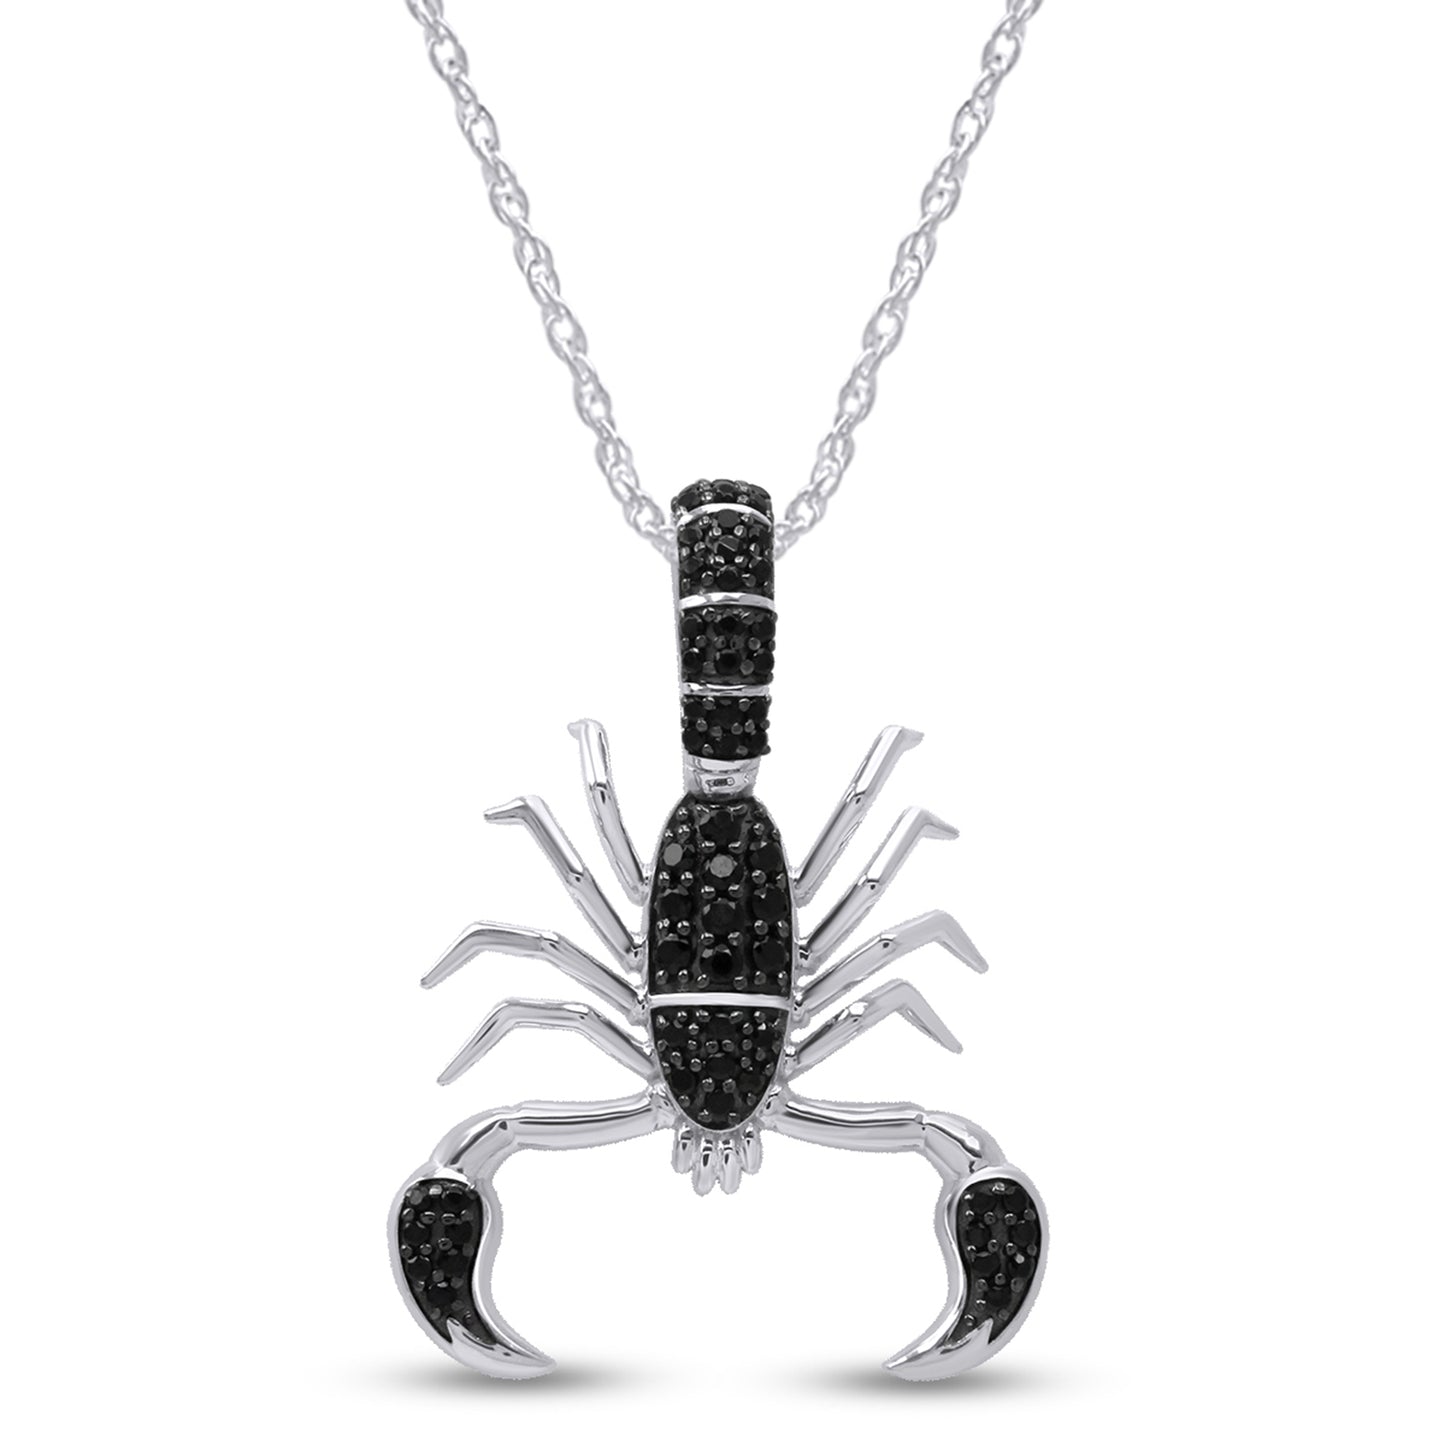 Round Cut Black Cubic Zirconia Scorpion Pendant Necklace In 925 Sterling Silver